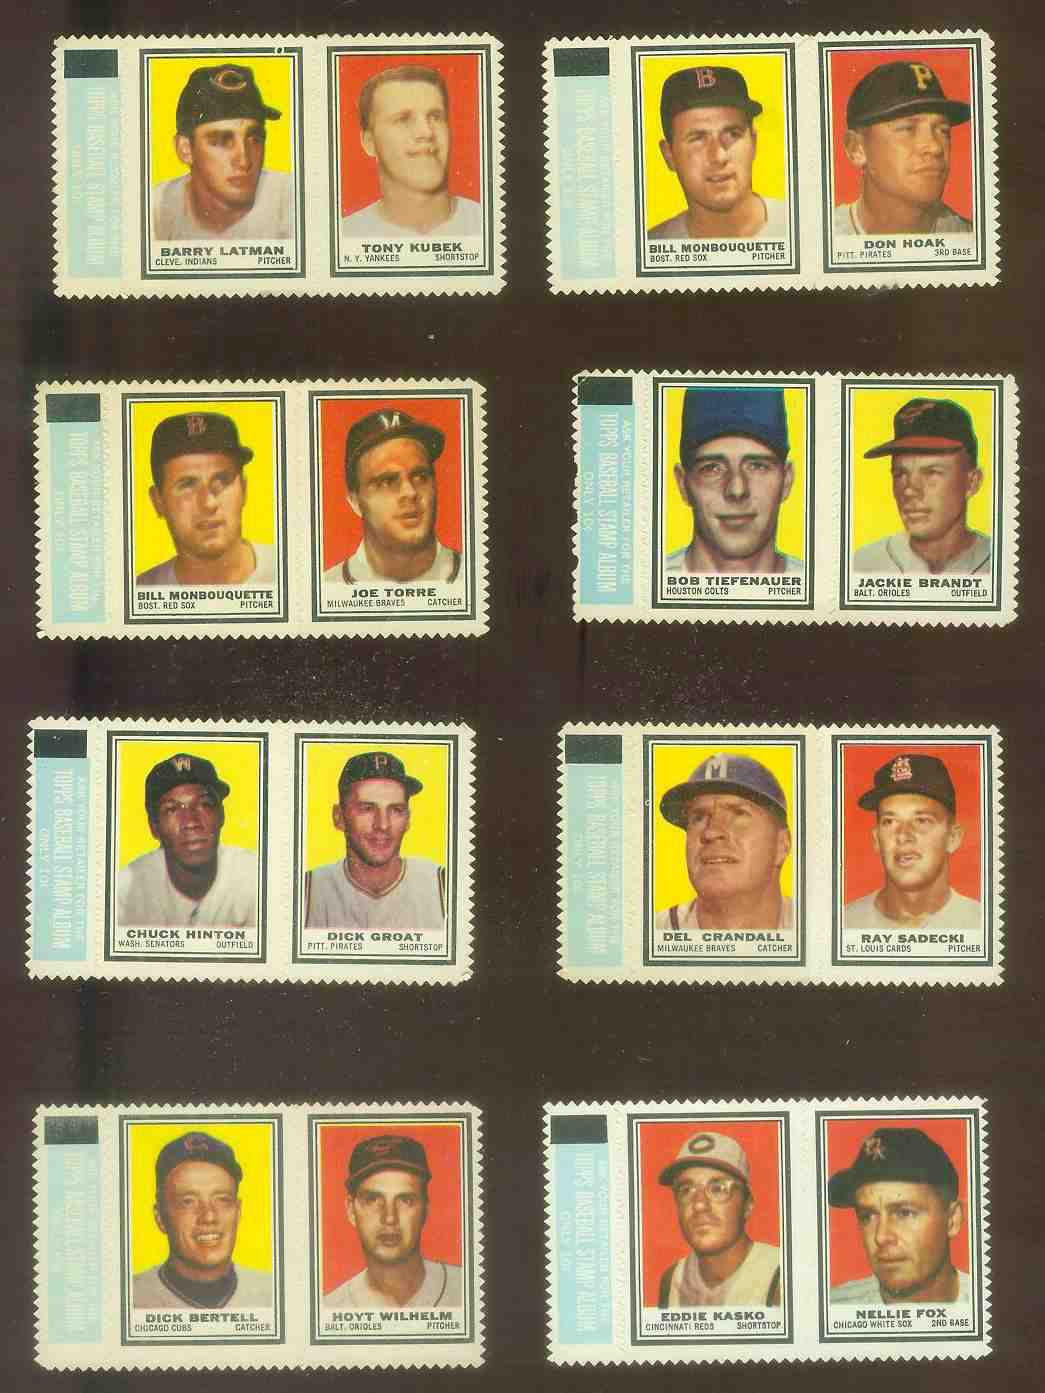   Chuck Hinton/Dick Groat - 1962 Topps STAMP PANEL with TAB !!! Baseball cards value